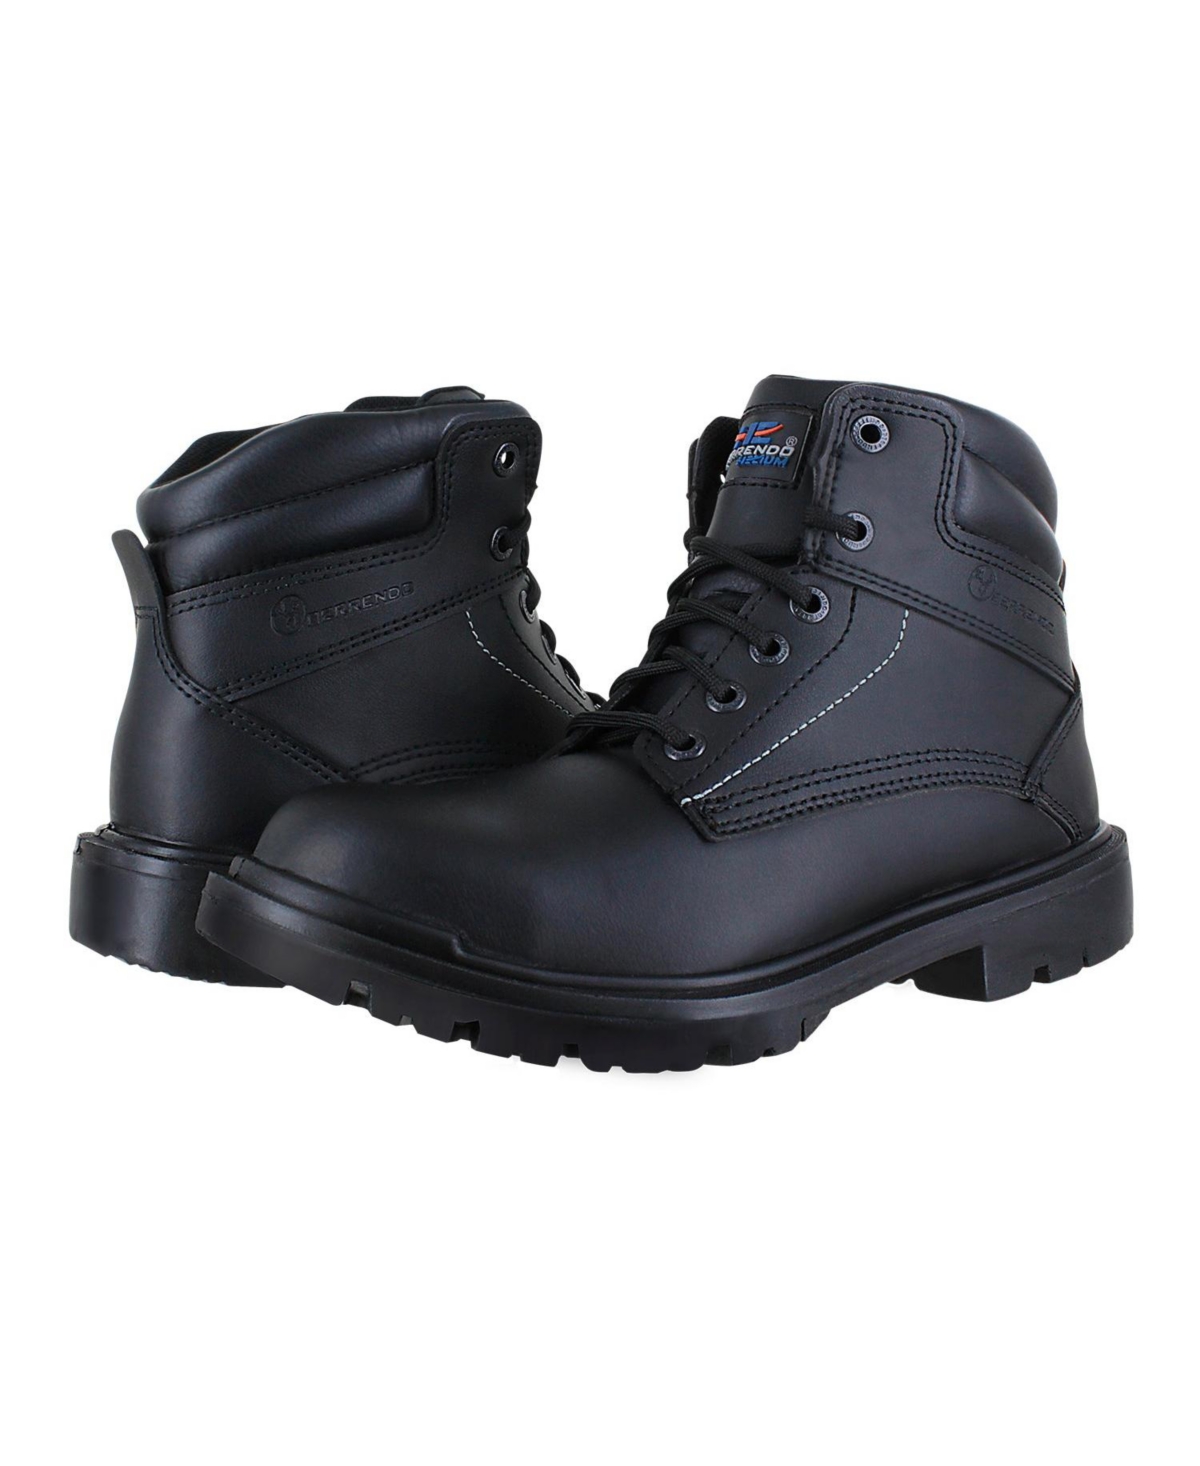 Steel Toe Work Boot For Men 6" - Eh Rated - Black